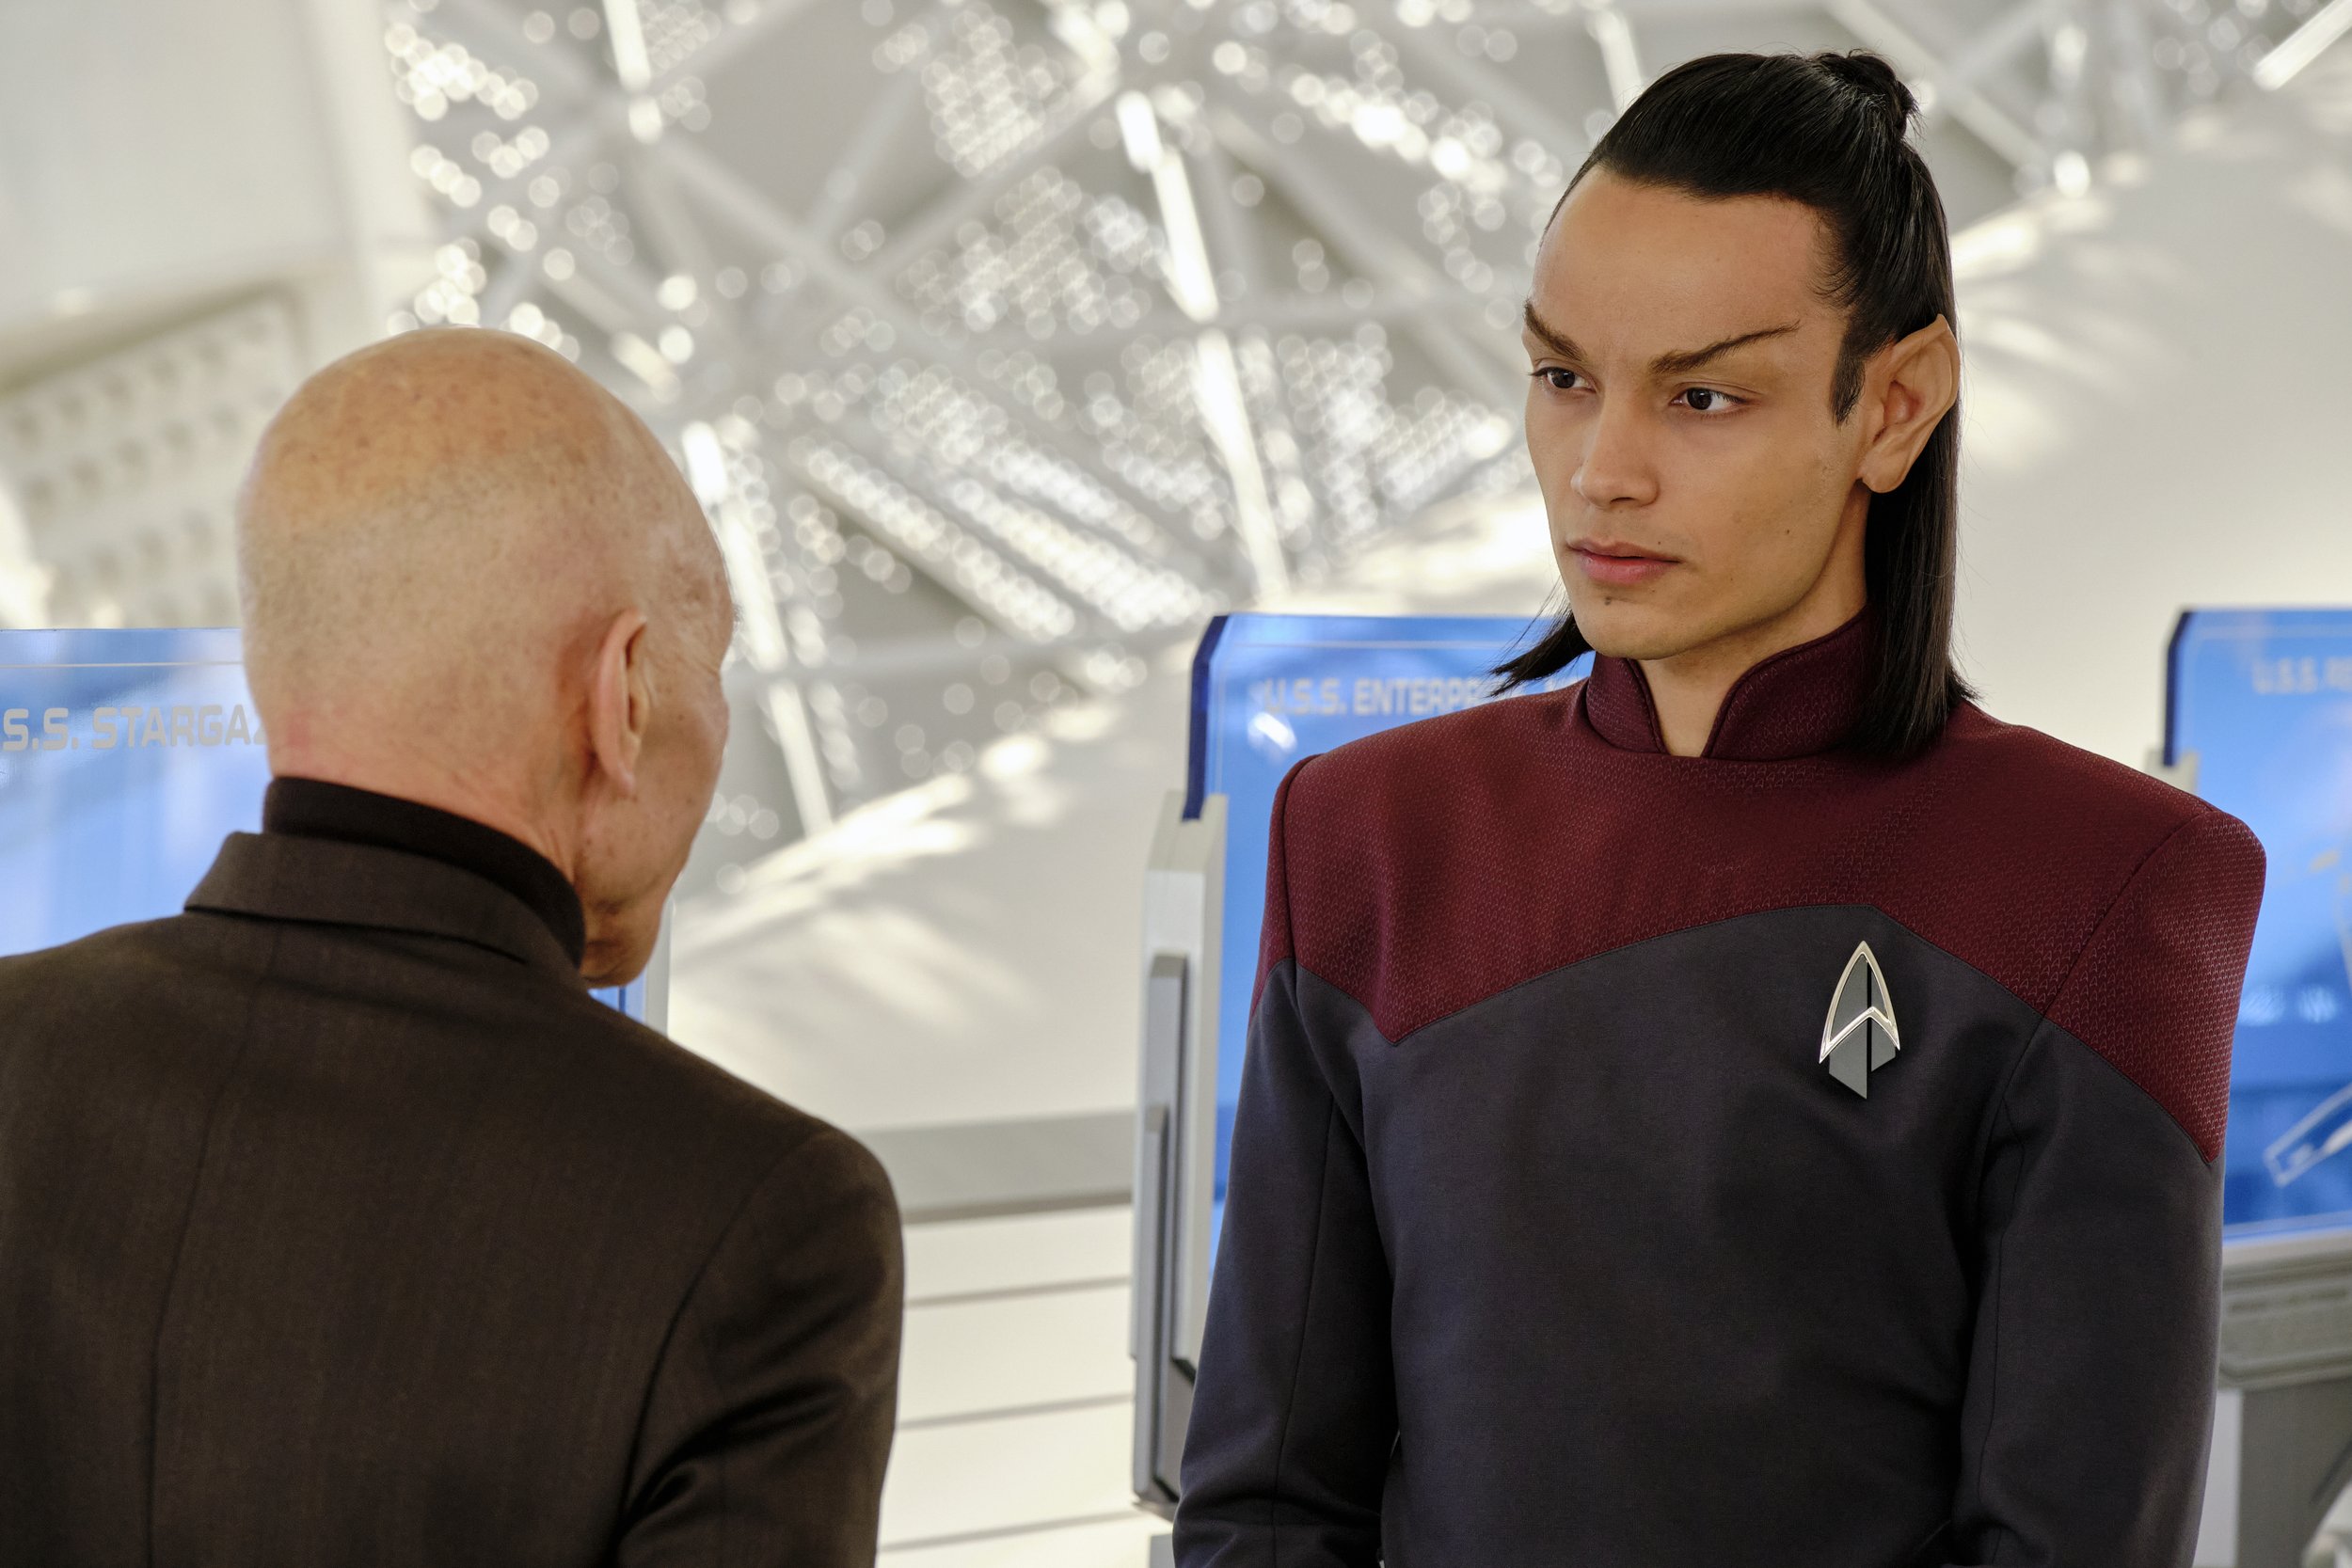   Pictured: Sir Patrick Stewart as Jean-Luc Picard and Evan Evagora as Elnor of the Paramount+ original series STAR TREK: PICARD. Photo Cr: Trae Patton/Paramount+ (C)2022 ViacomCBS. All Rights Reserved.  